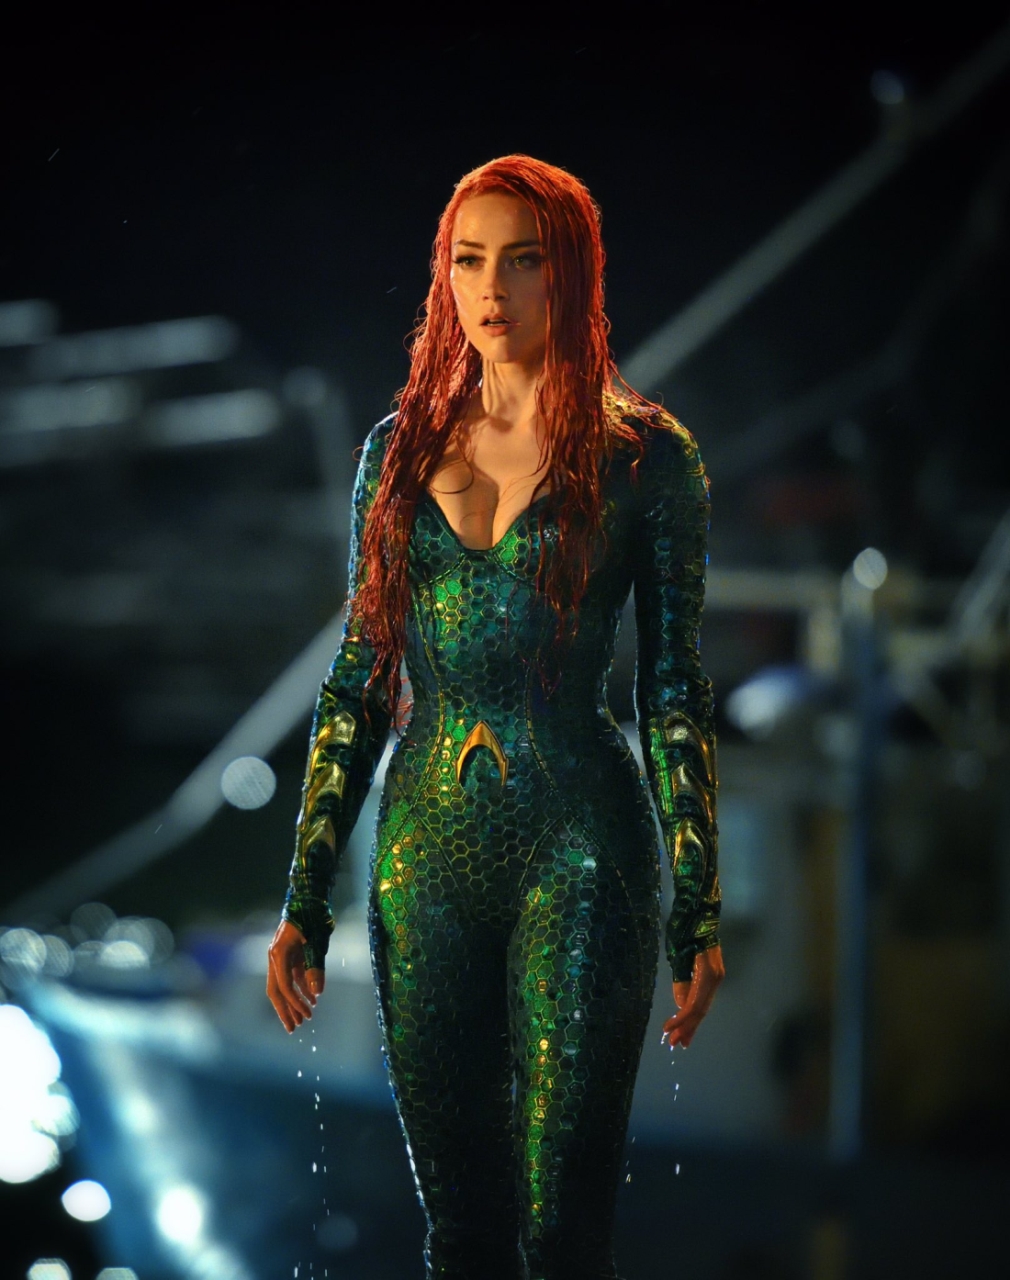 People 1010x1280 Amber Heard women actress redhead long hair bodysuit Mera Aquaman DC Comics wet body DC Extended Universe costumes dyed hair movies film stills boobs cleavage wet hair